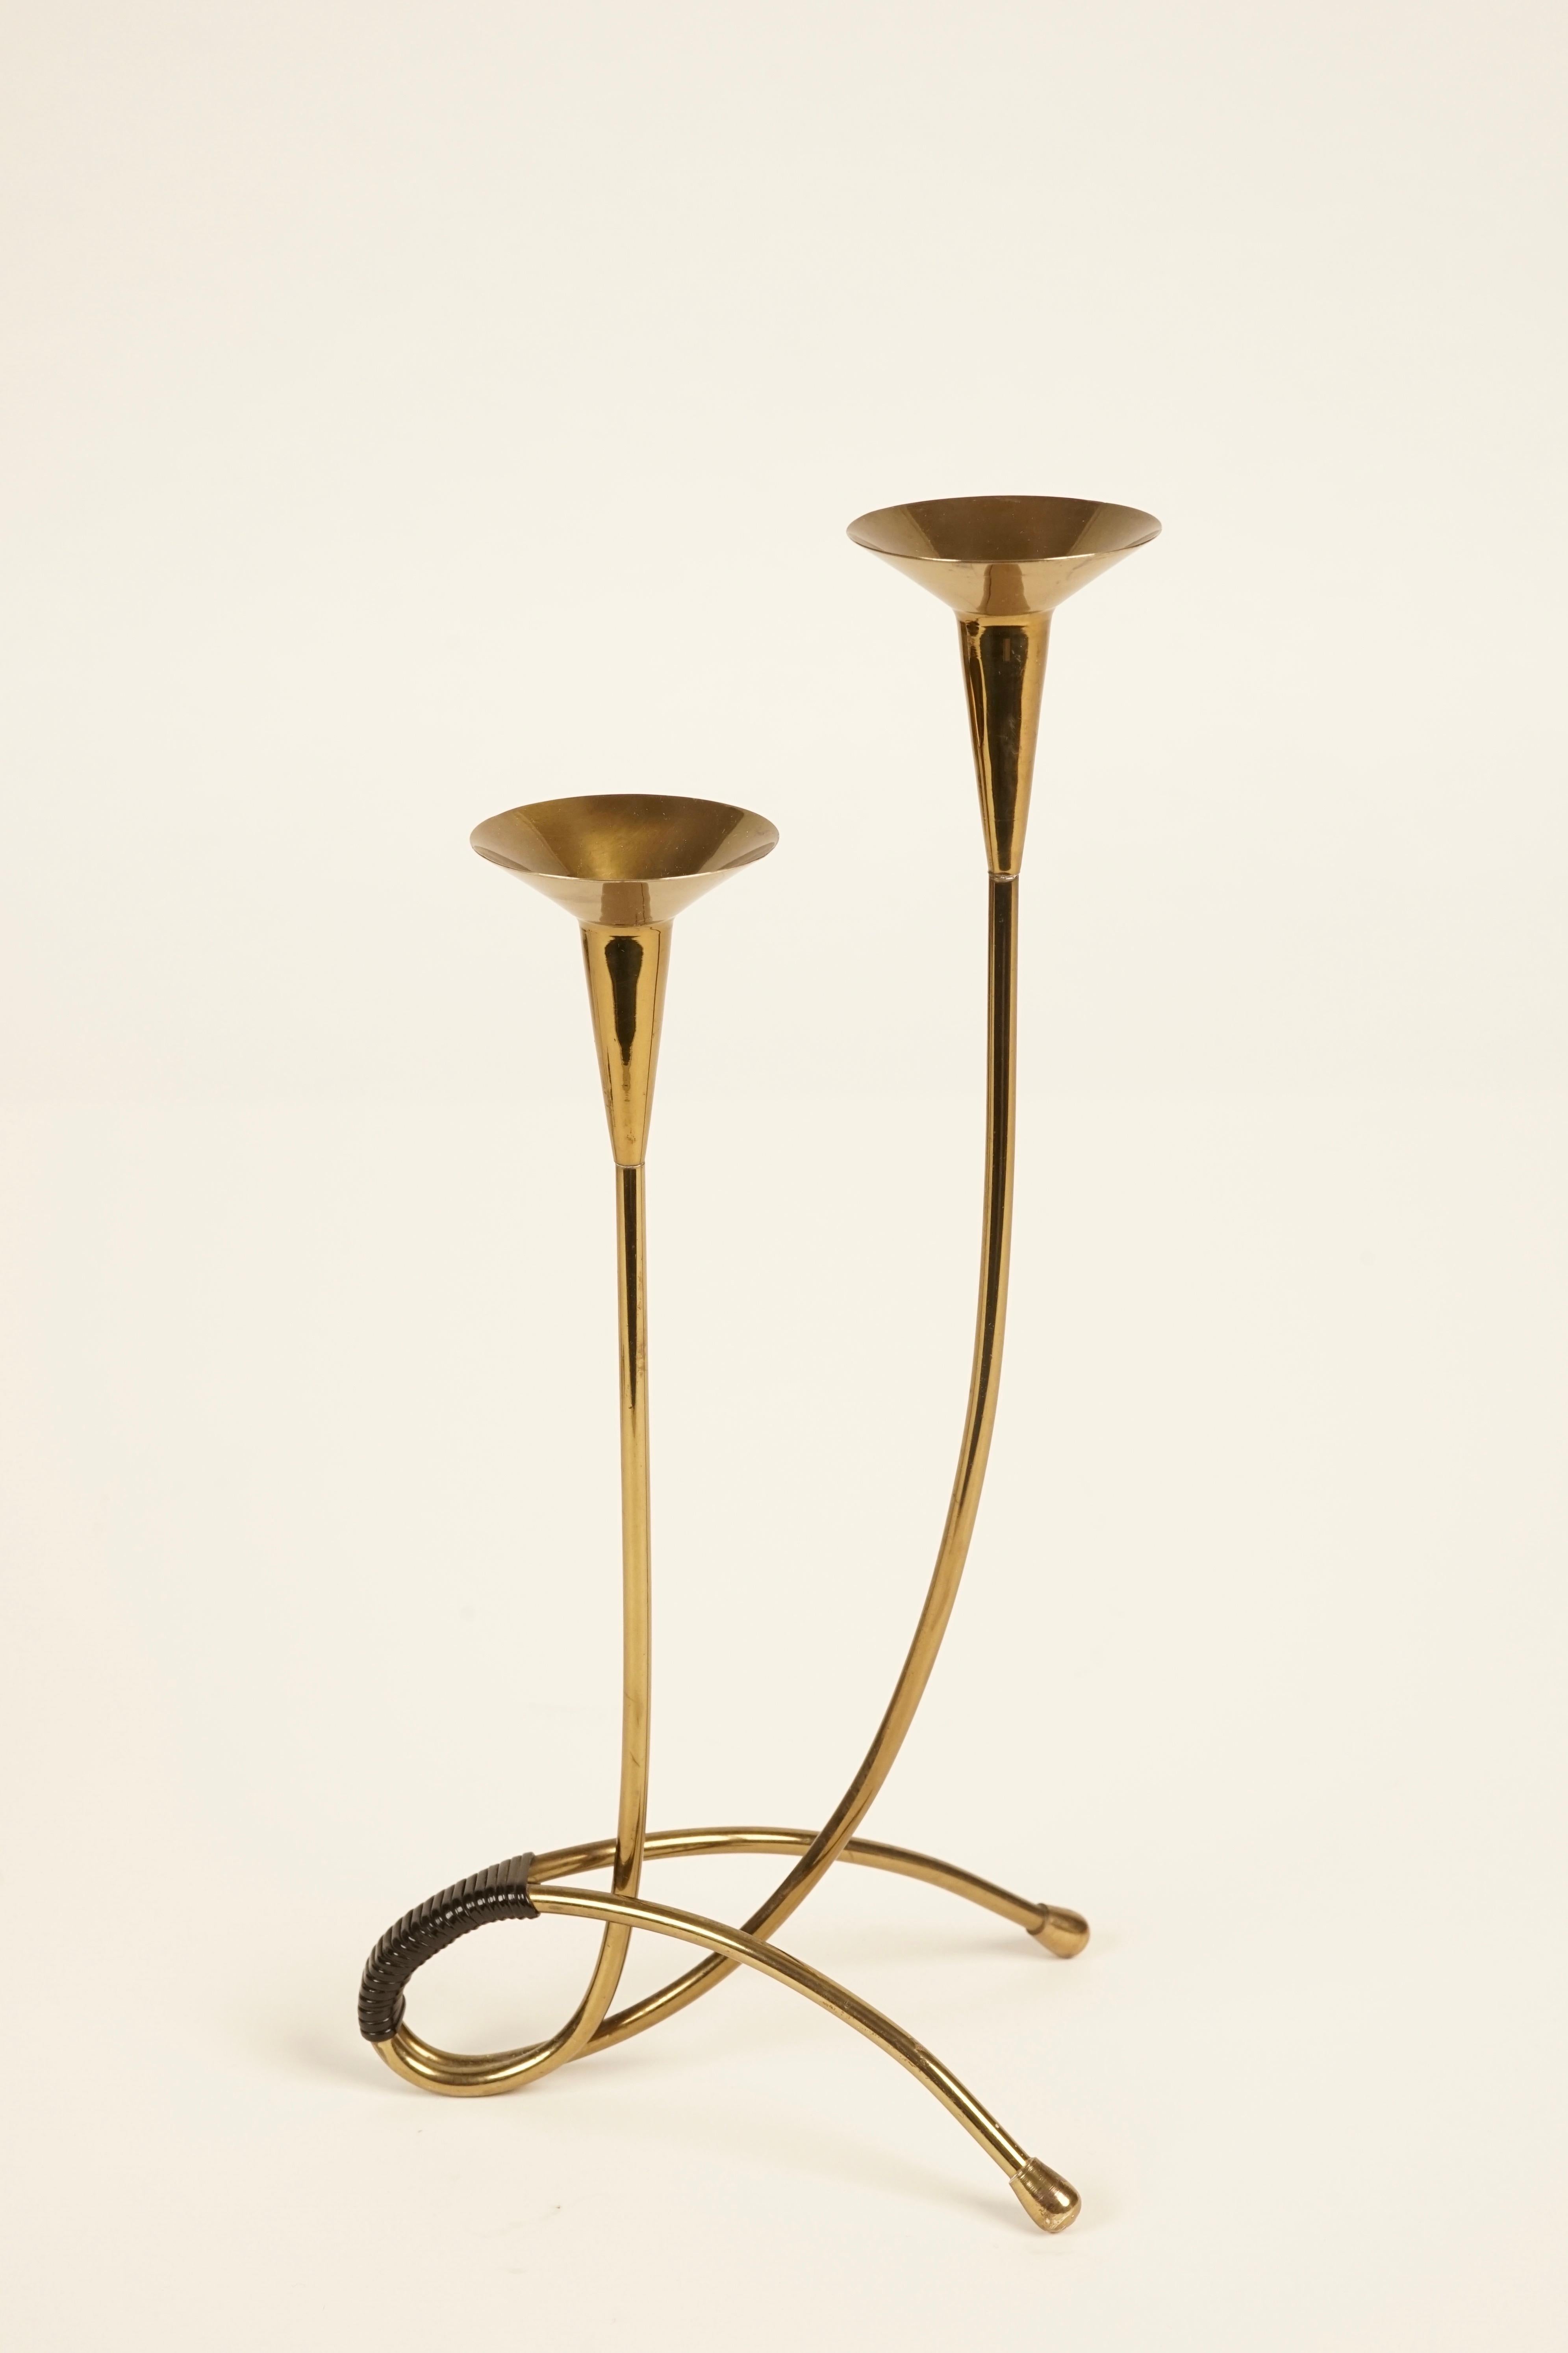 Decorative midcentury candleholder from Austria. It comes as a set and includes scissors for controlling the wick and another element for snuffing the frame. Made of high quality brass, all the pieces are in very fine condition. Scissors and snuff